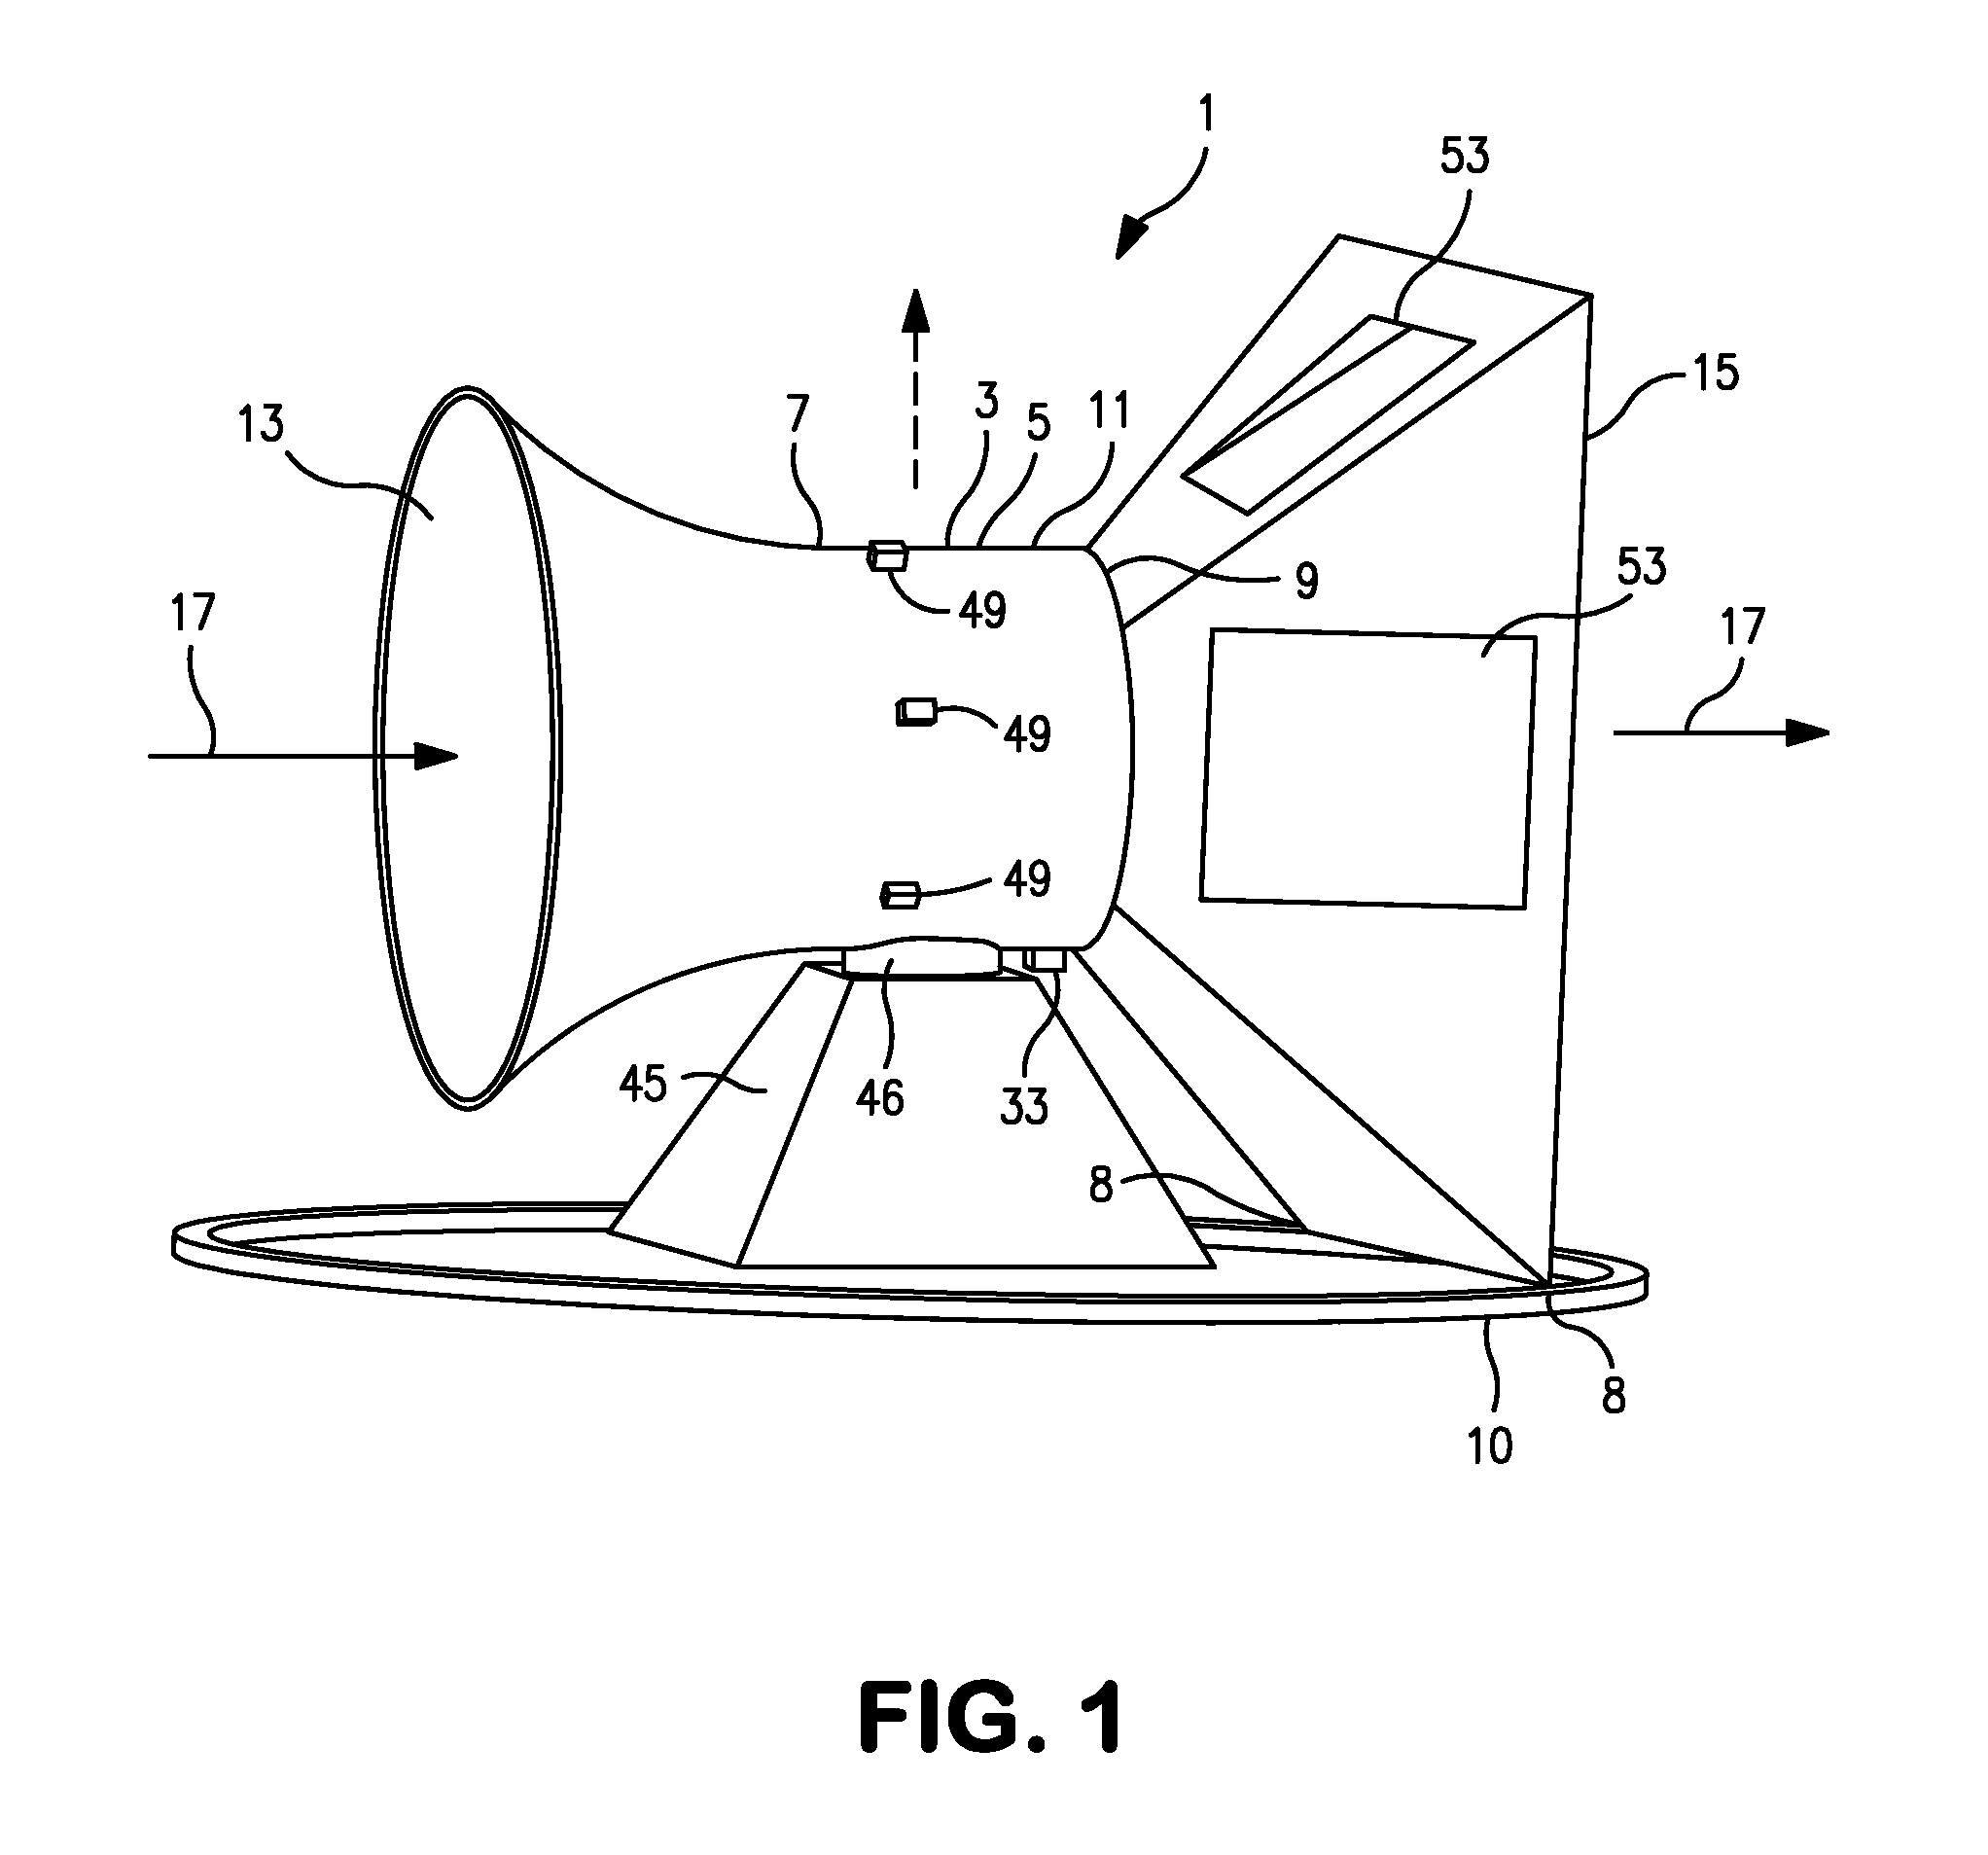 Synchronous Induced Wind Power Generation System